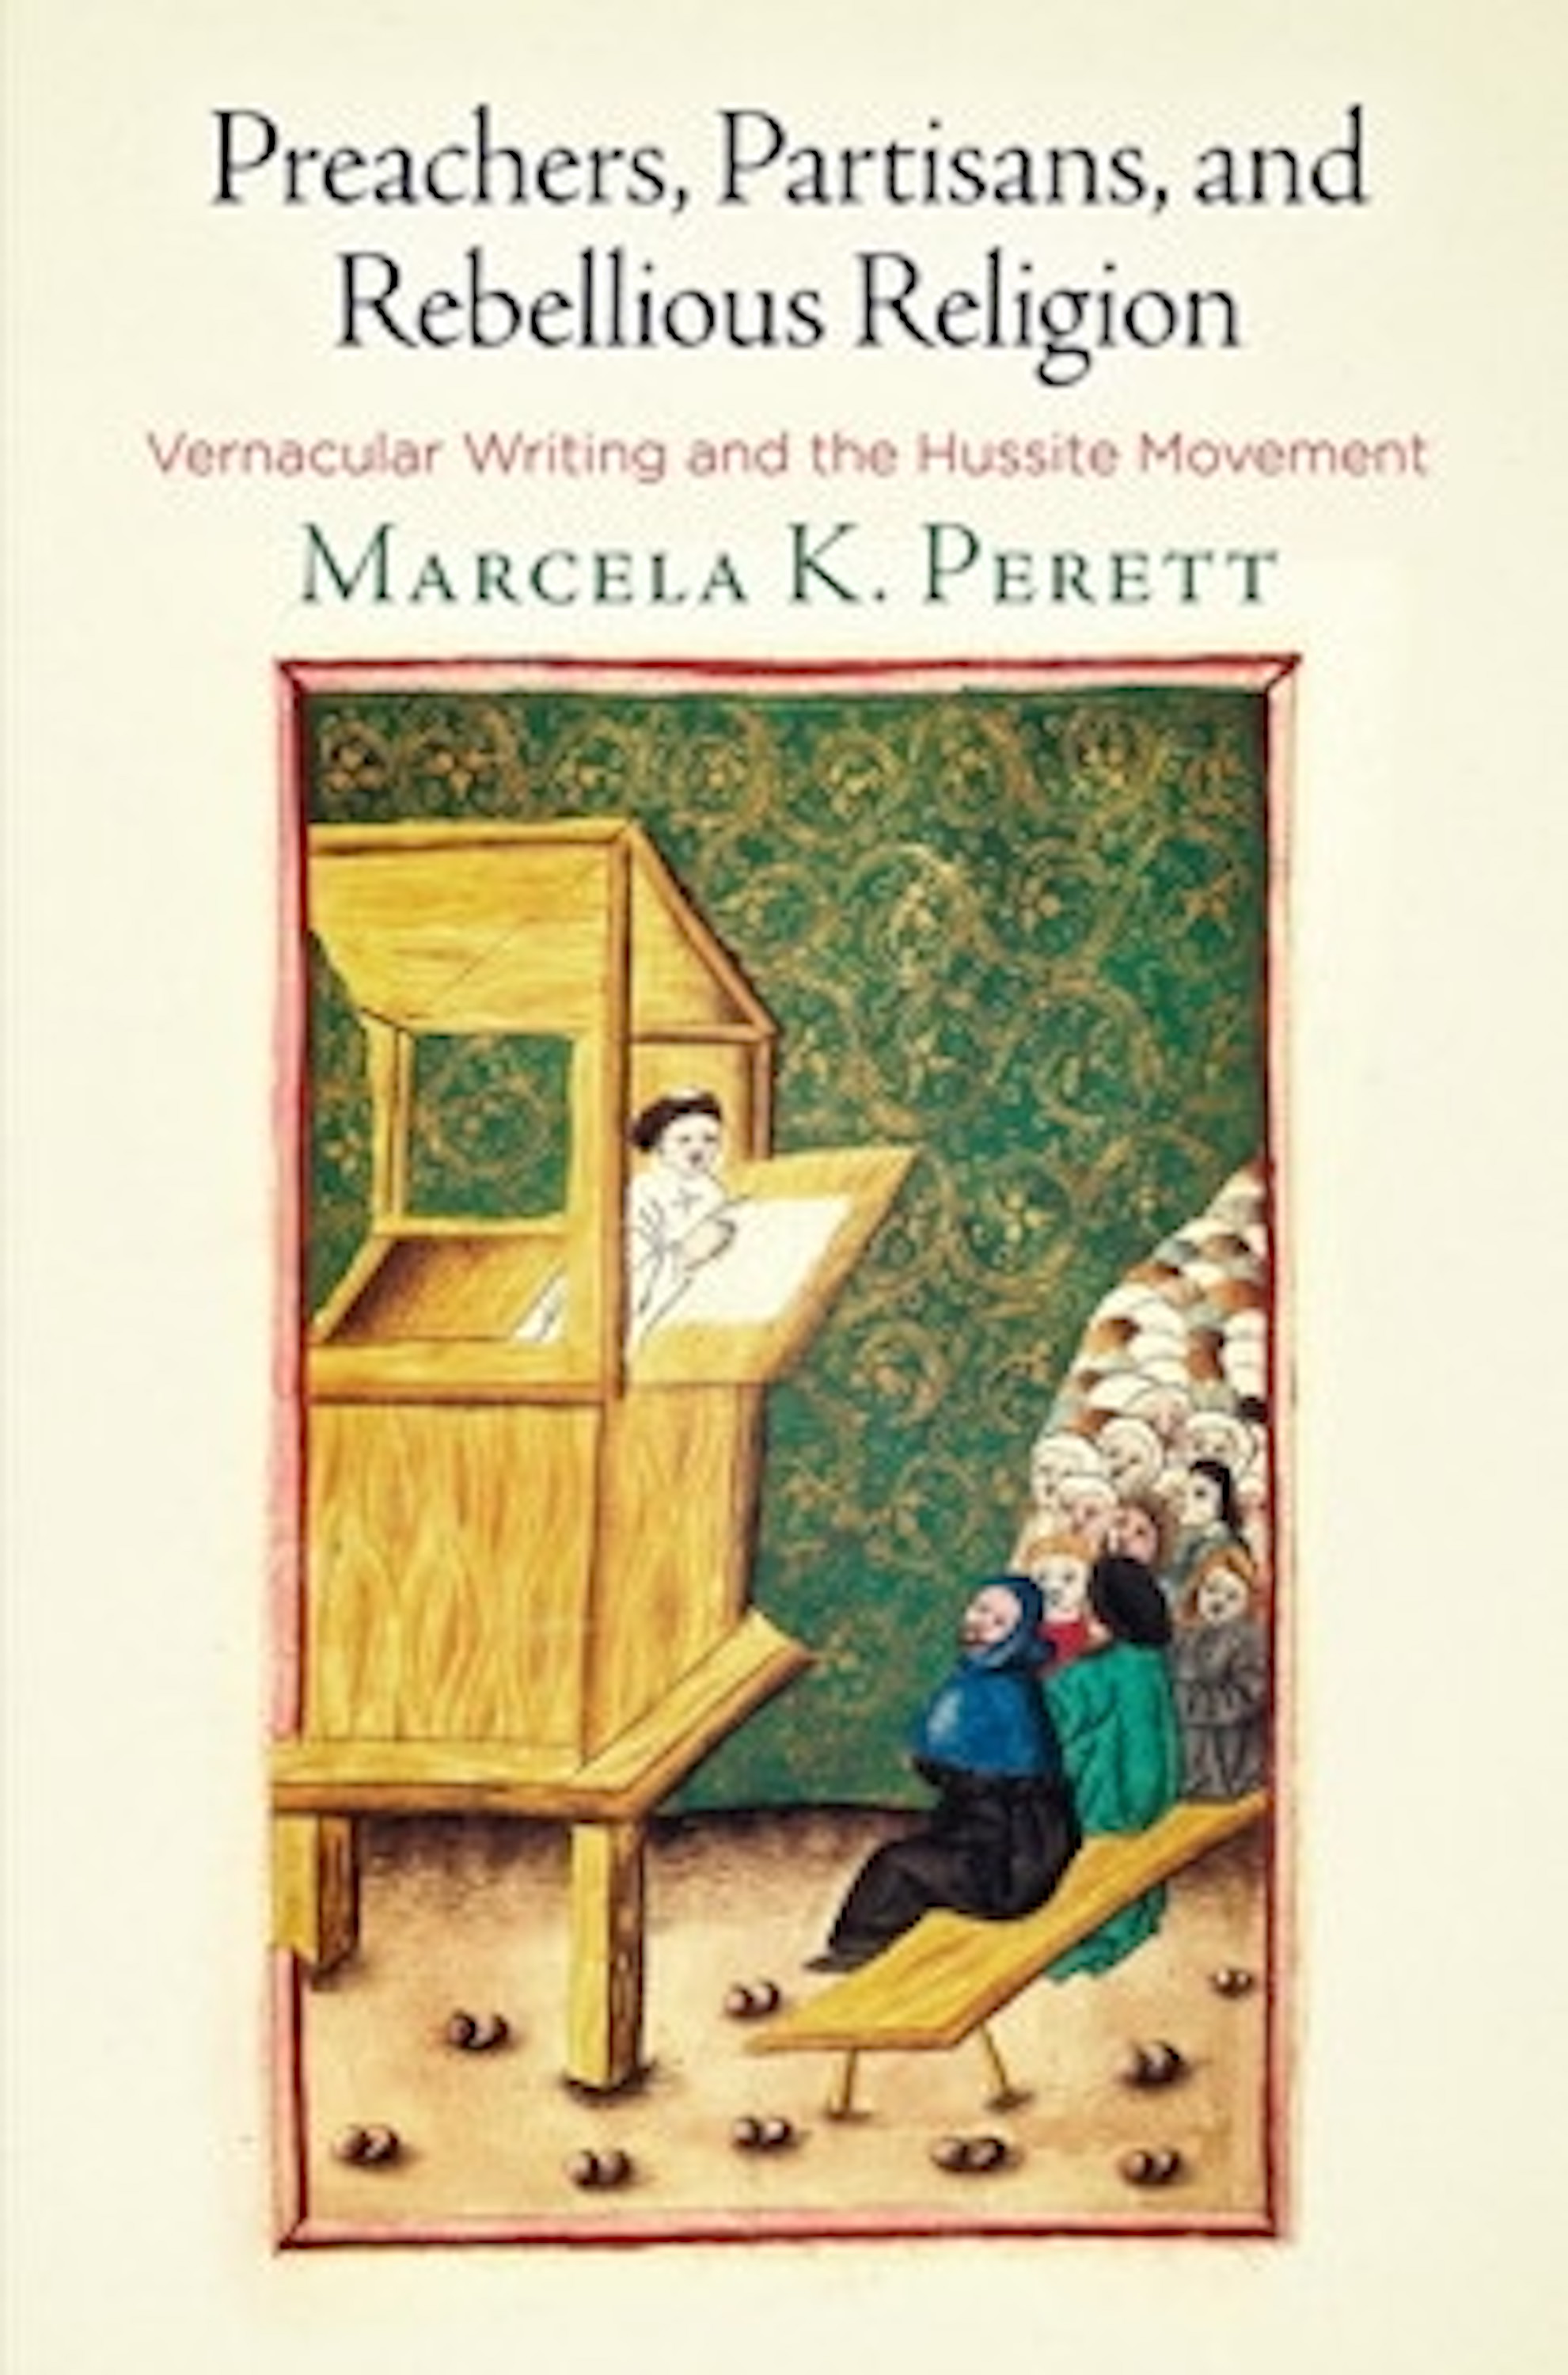 Review of Marcela K. Perett, <i>Preachers, Partisans, and Rebellious Religion: Vernacular Writing and the Hussite Movement, The Middle Ages</i> (Philadelphia: University of Pennsylvania Press, 2018), in <i>The Medieval Review</i> (2020). [I. Forrest]